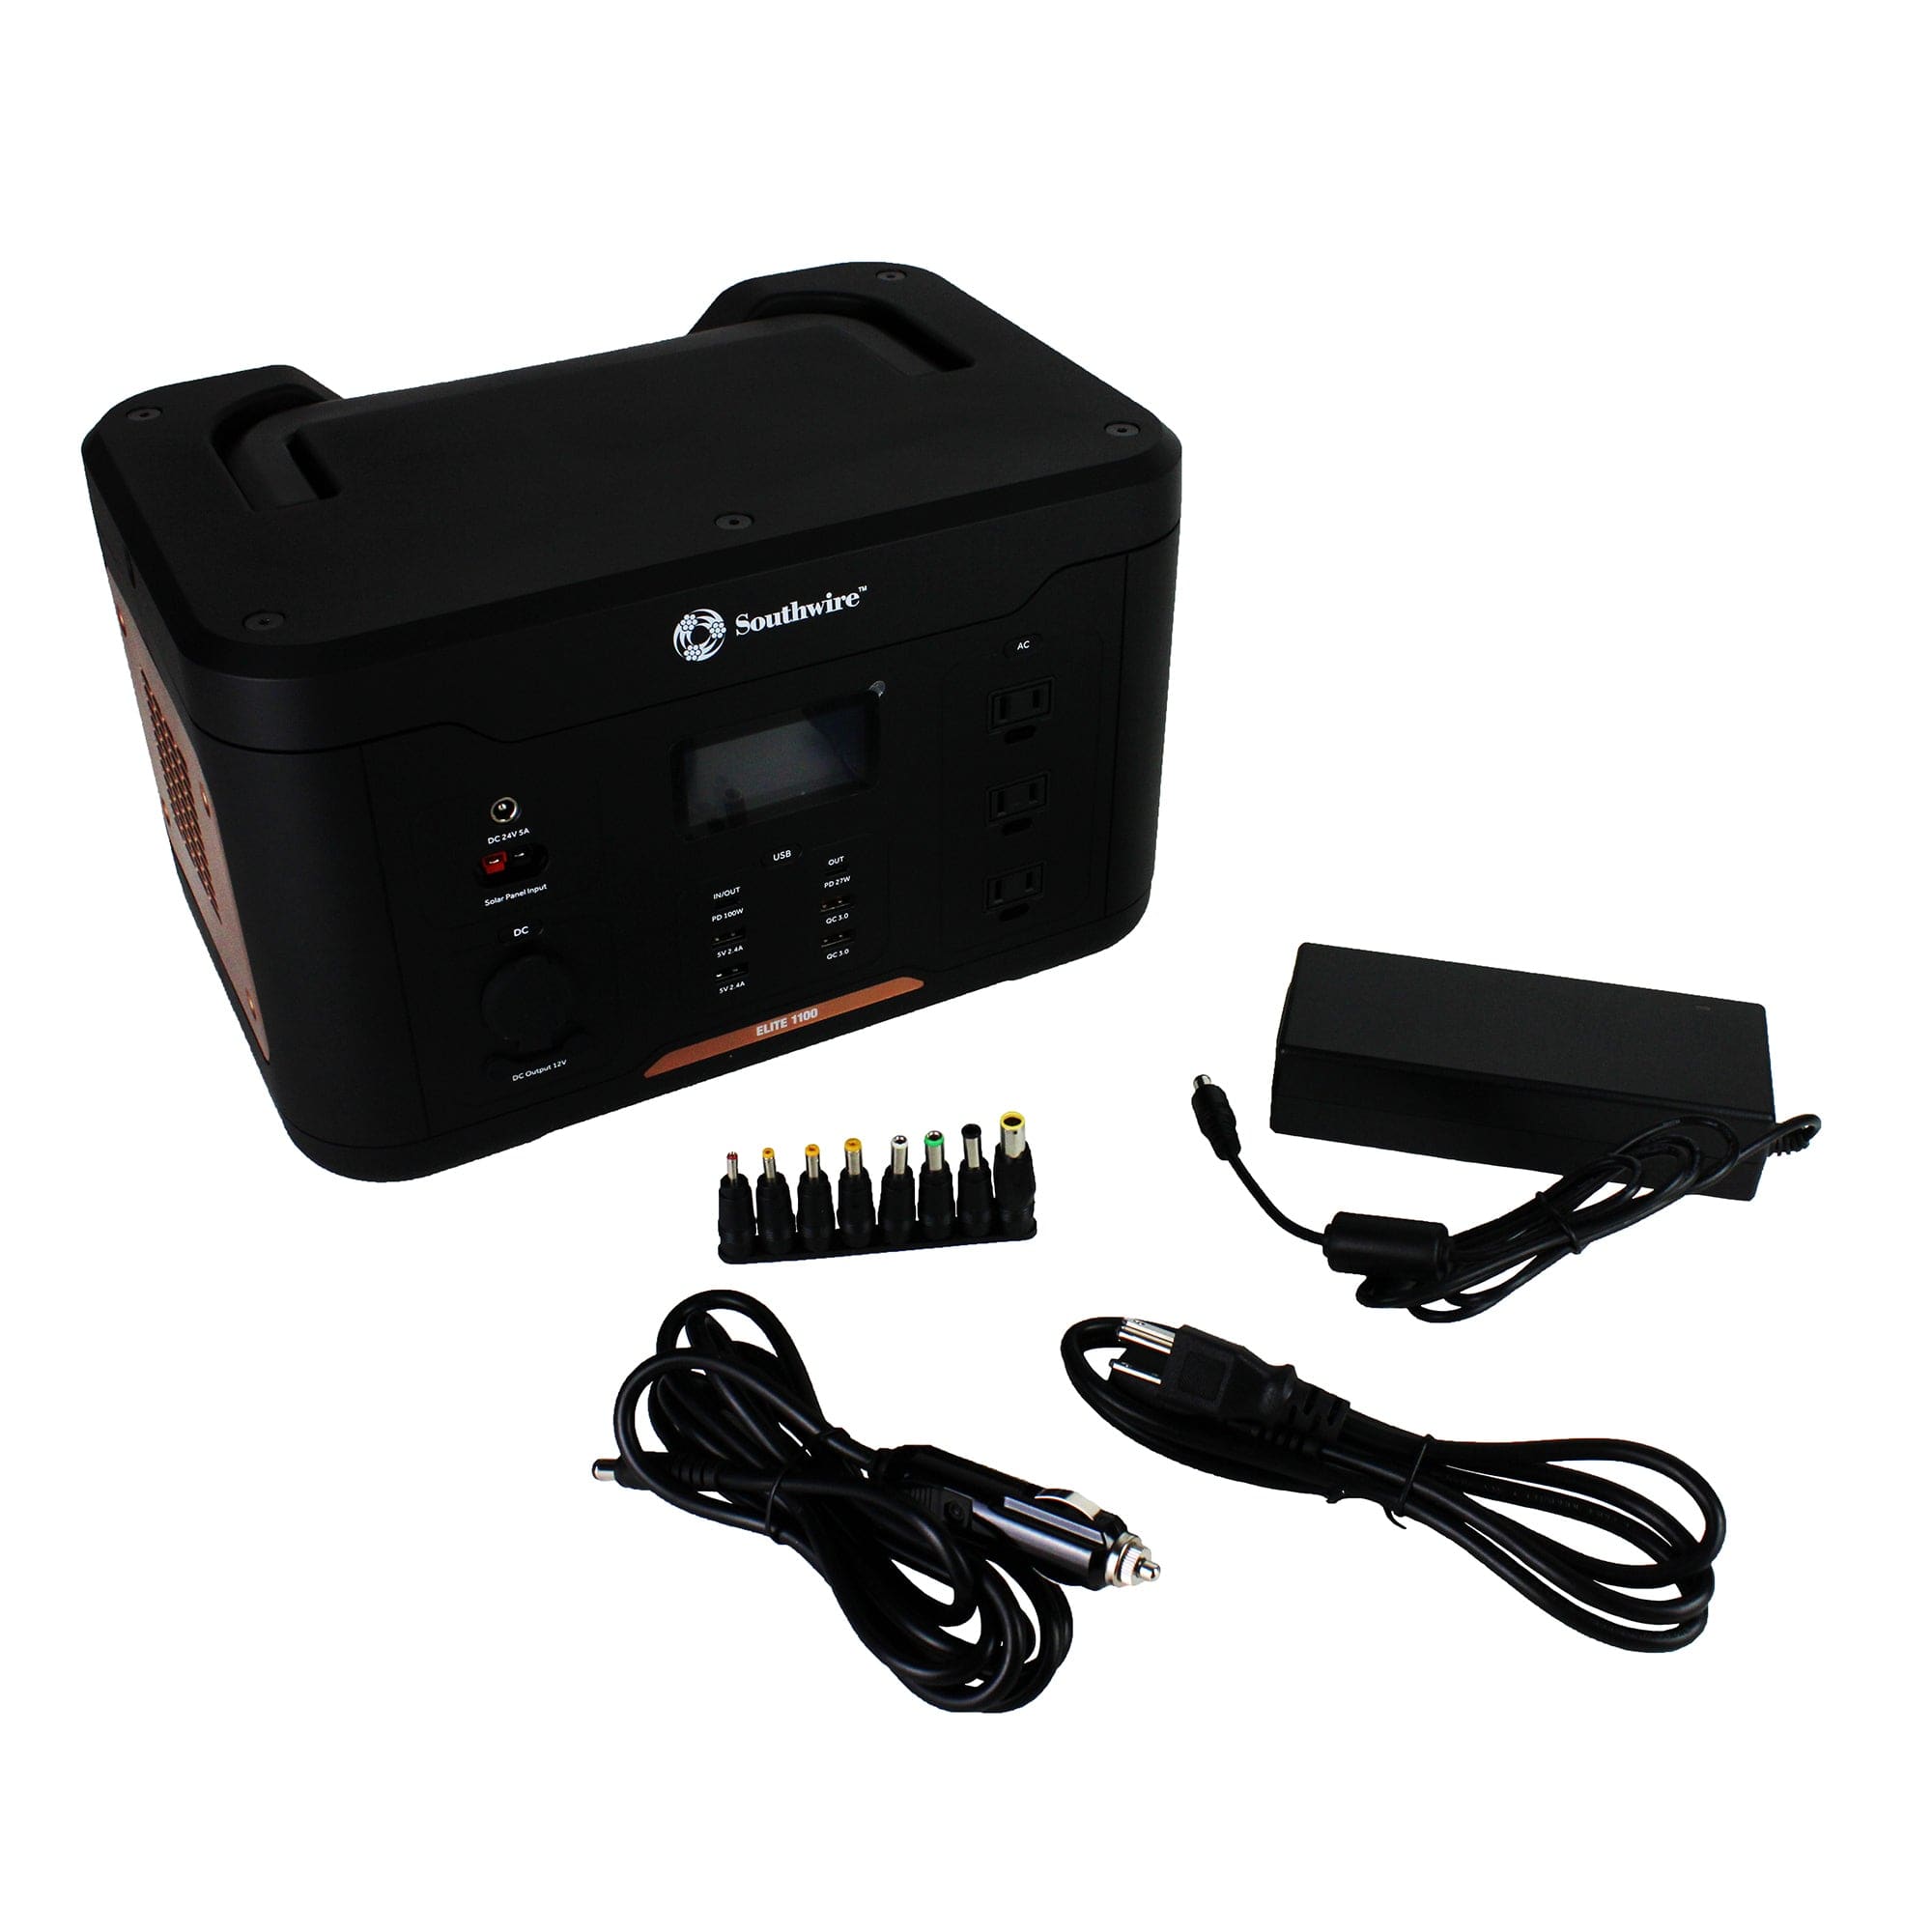 Southwire 53253 Elite 1100 Series Portable Power Station with AC and DC Adapters